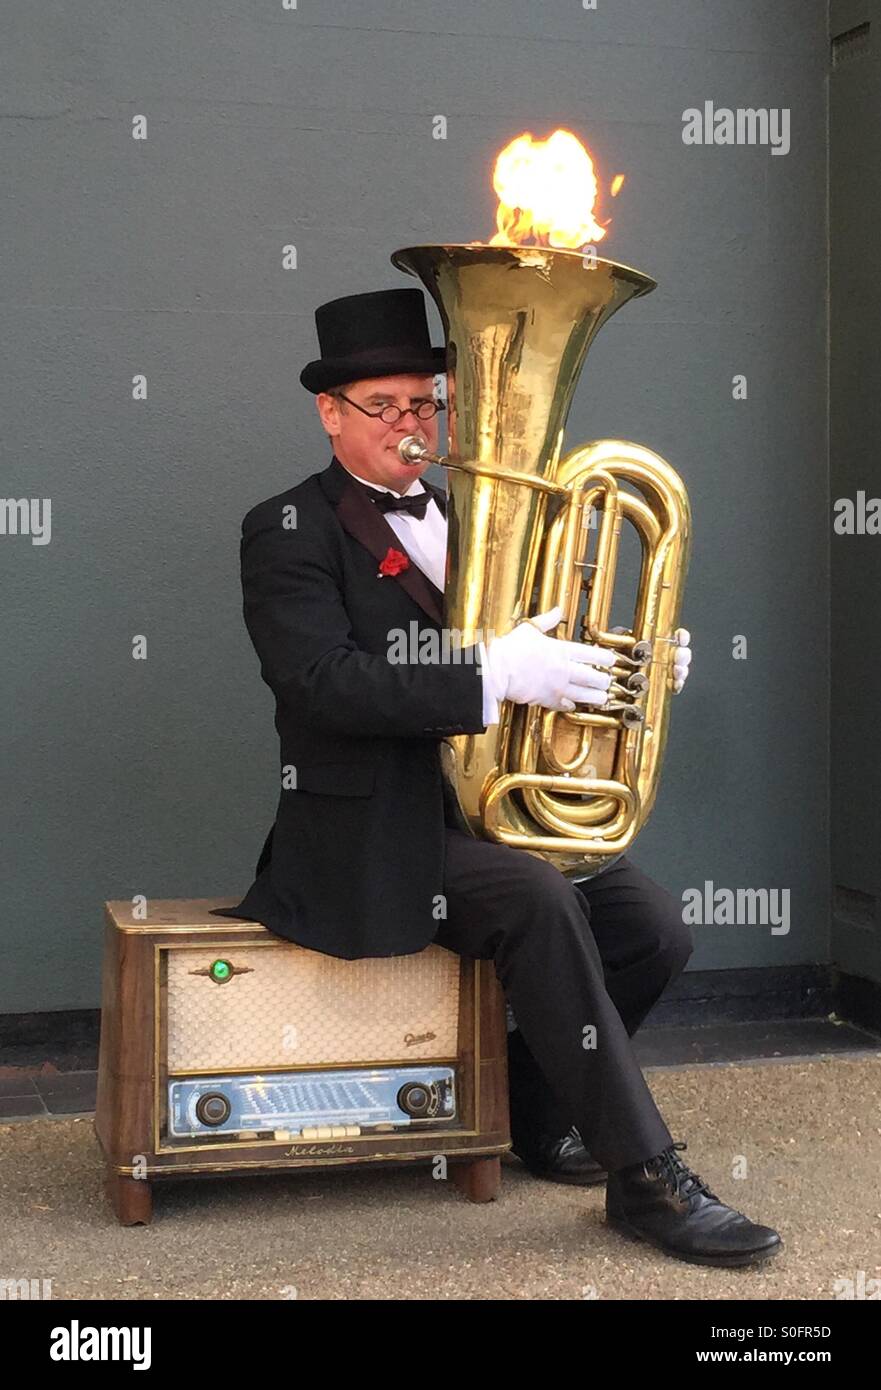 The man plays a tuba stock image. Image of background - 19553361